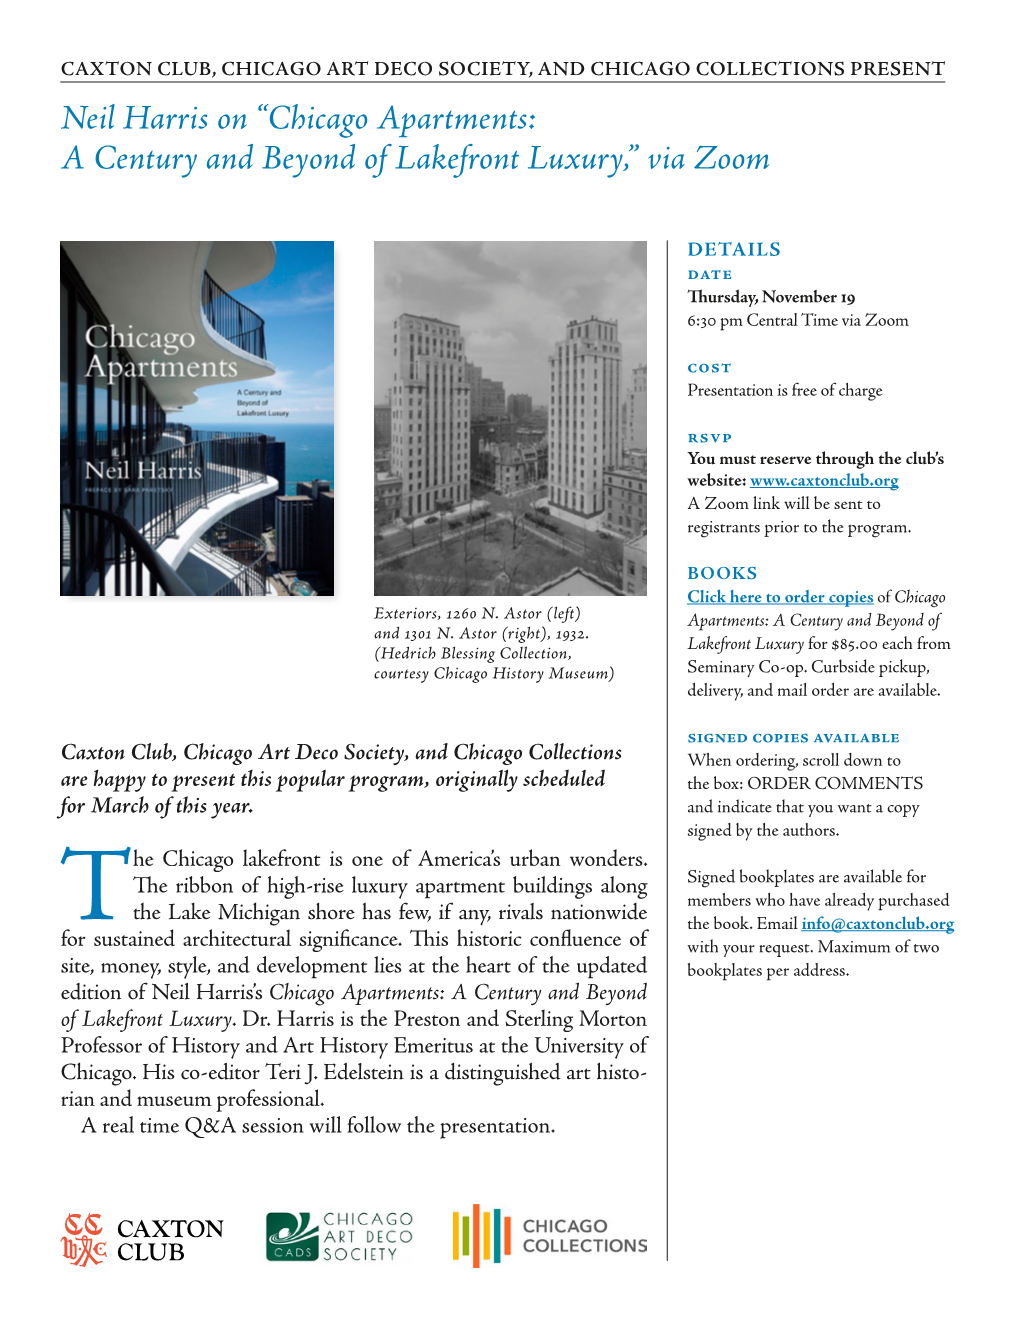 Neil Harris on “Chicago Apartments: a Century and Beyond of Lakefront Luxury,” Via Zoom